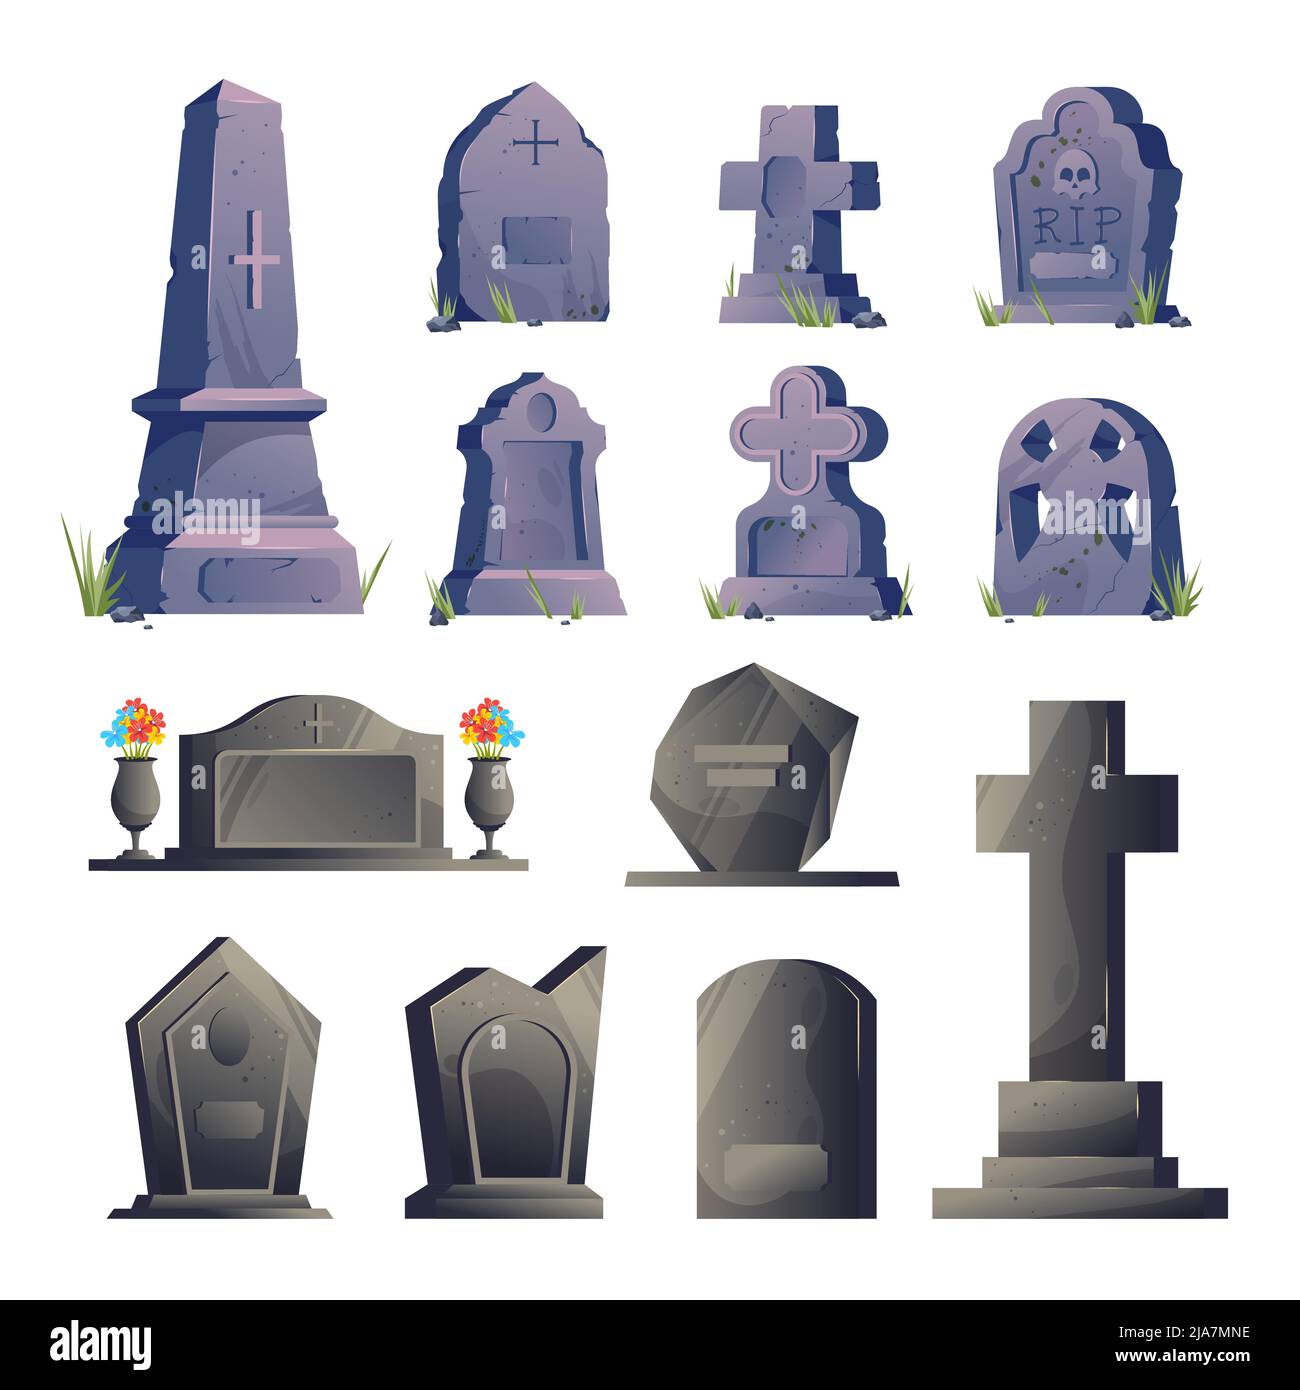 Cemetery gravestone icon set tombstones old and new in different sizes and colors with flower beds vector illustration Stock Vector